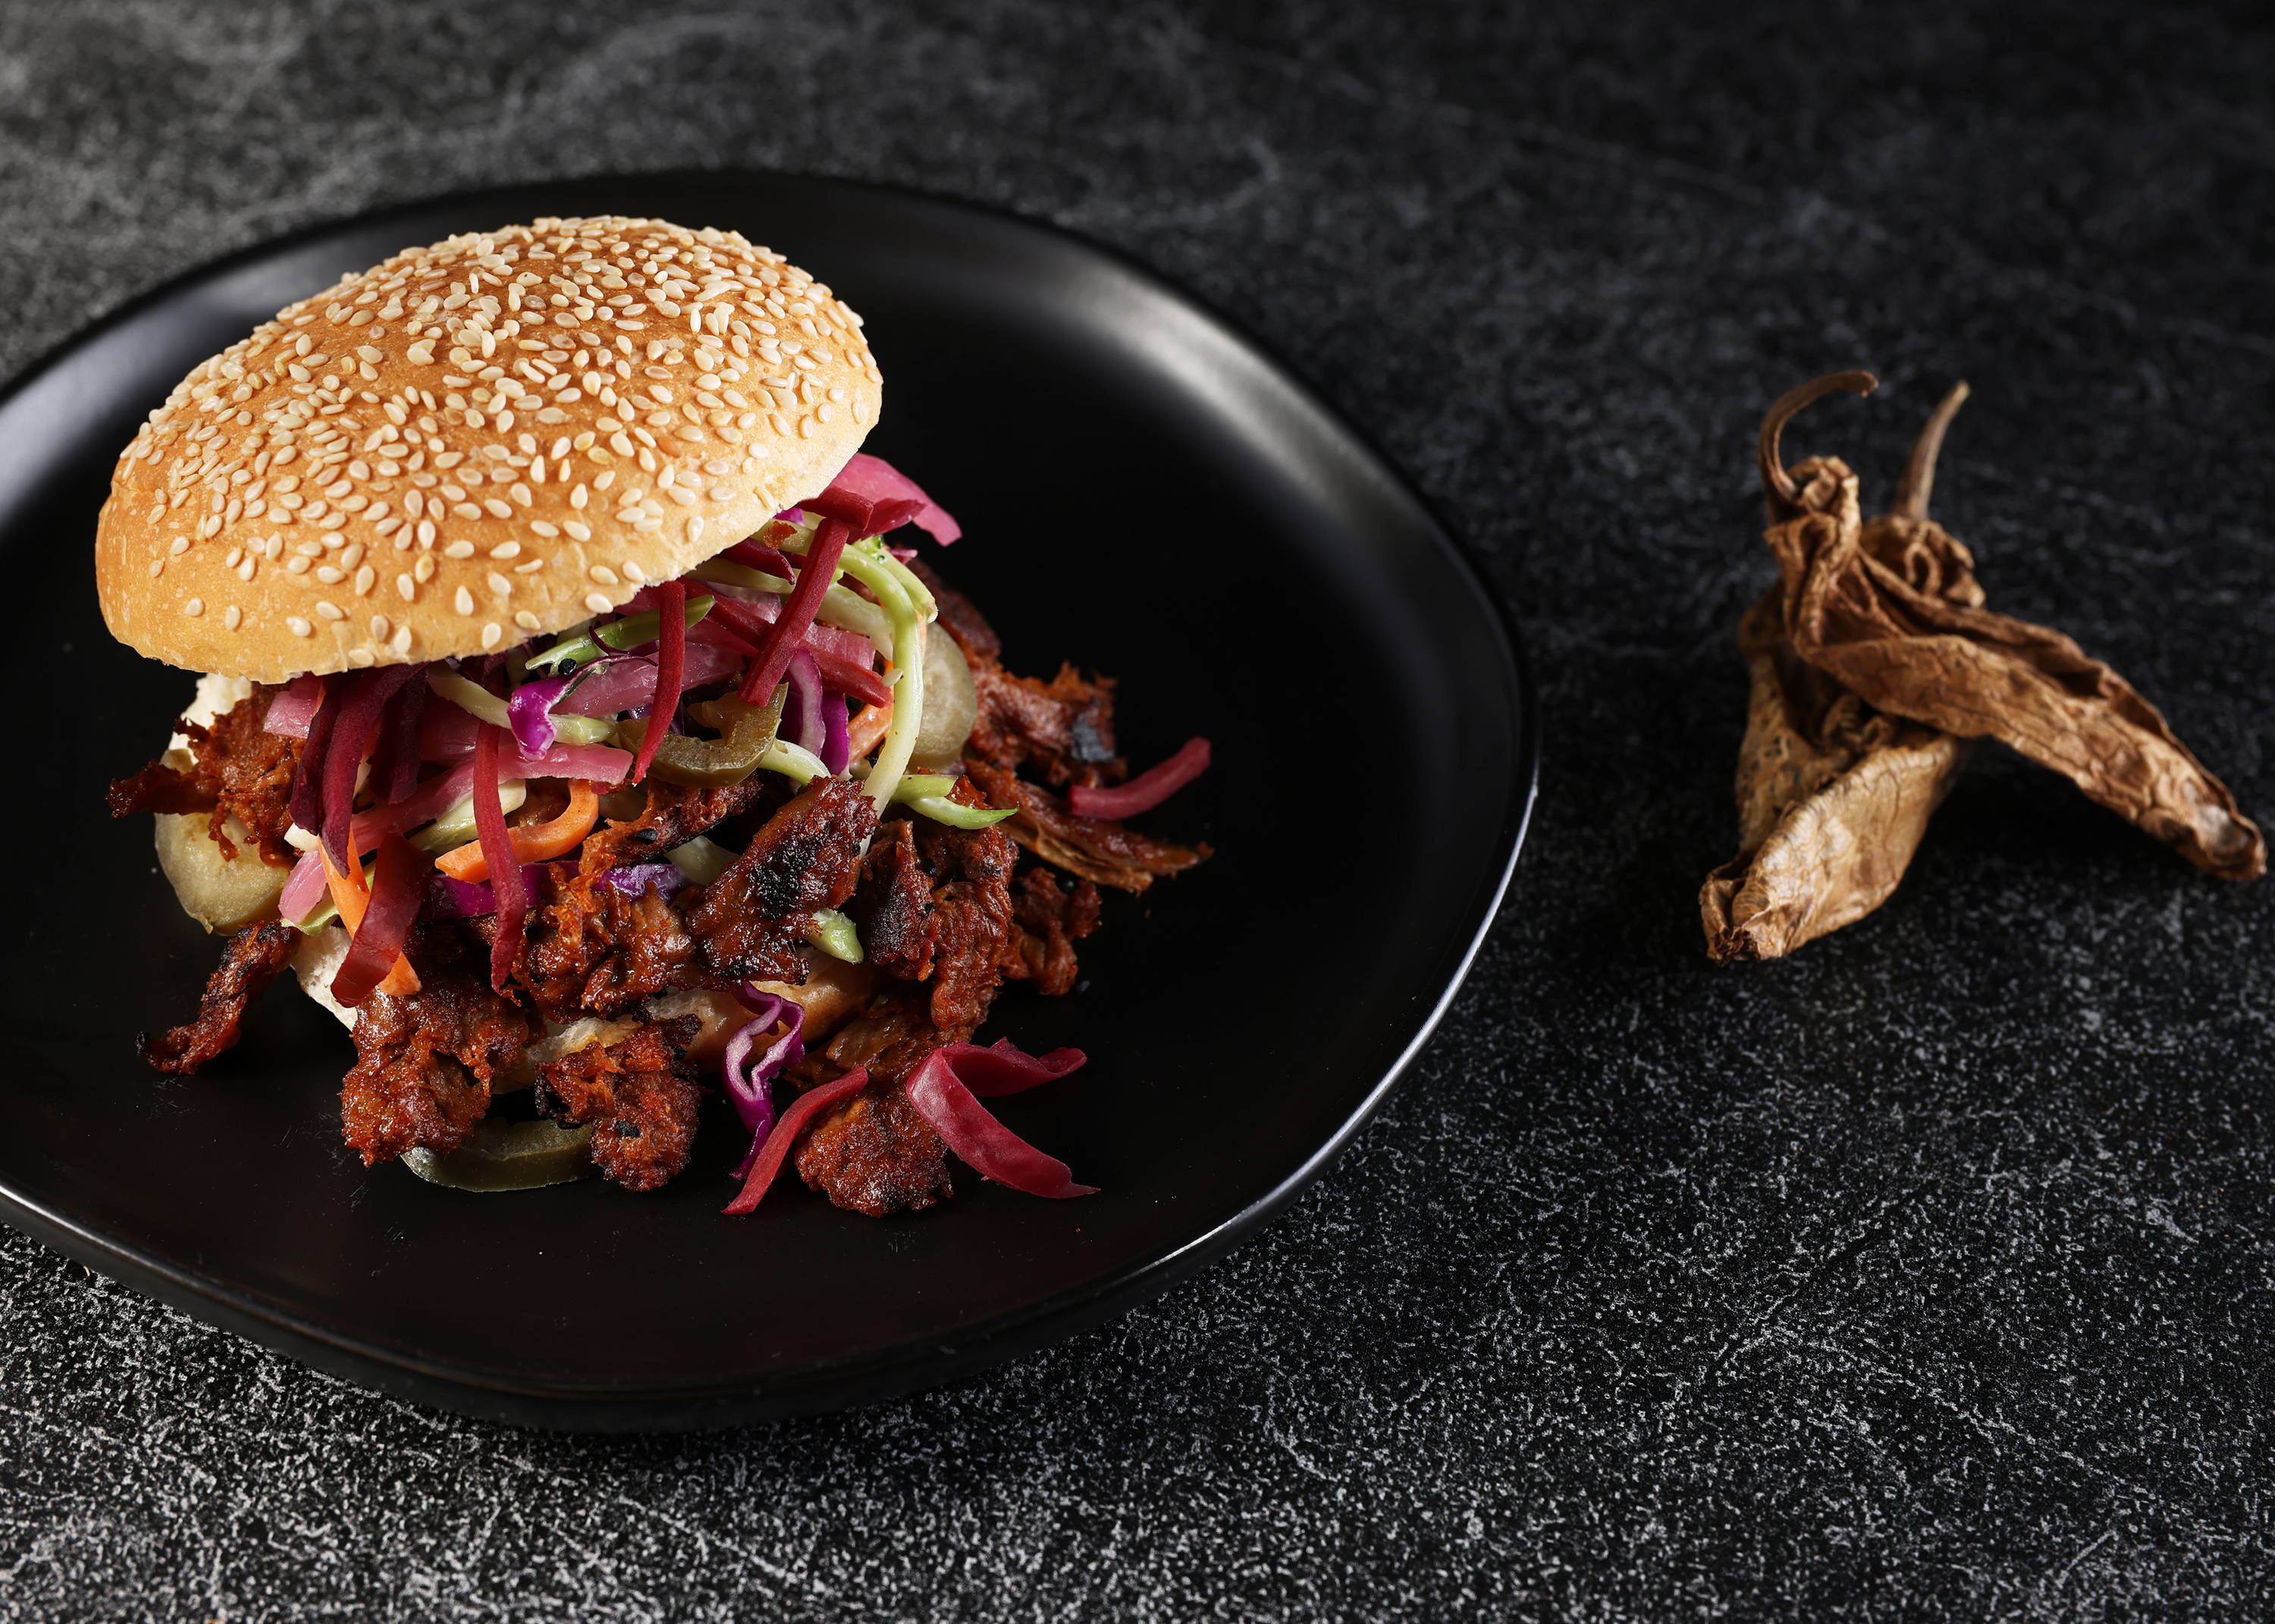 Texas BBQ Harvest Shreds on a bun with pickled red onions and slaw on a black plate next to dried chipotle peppers